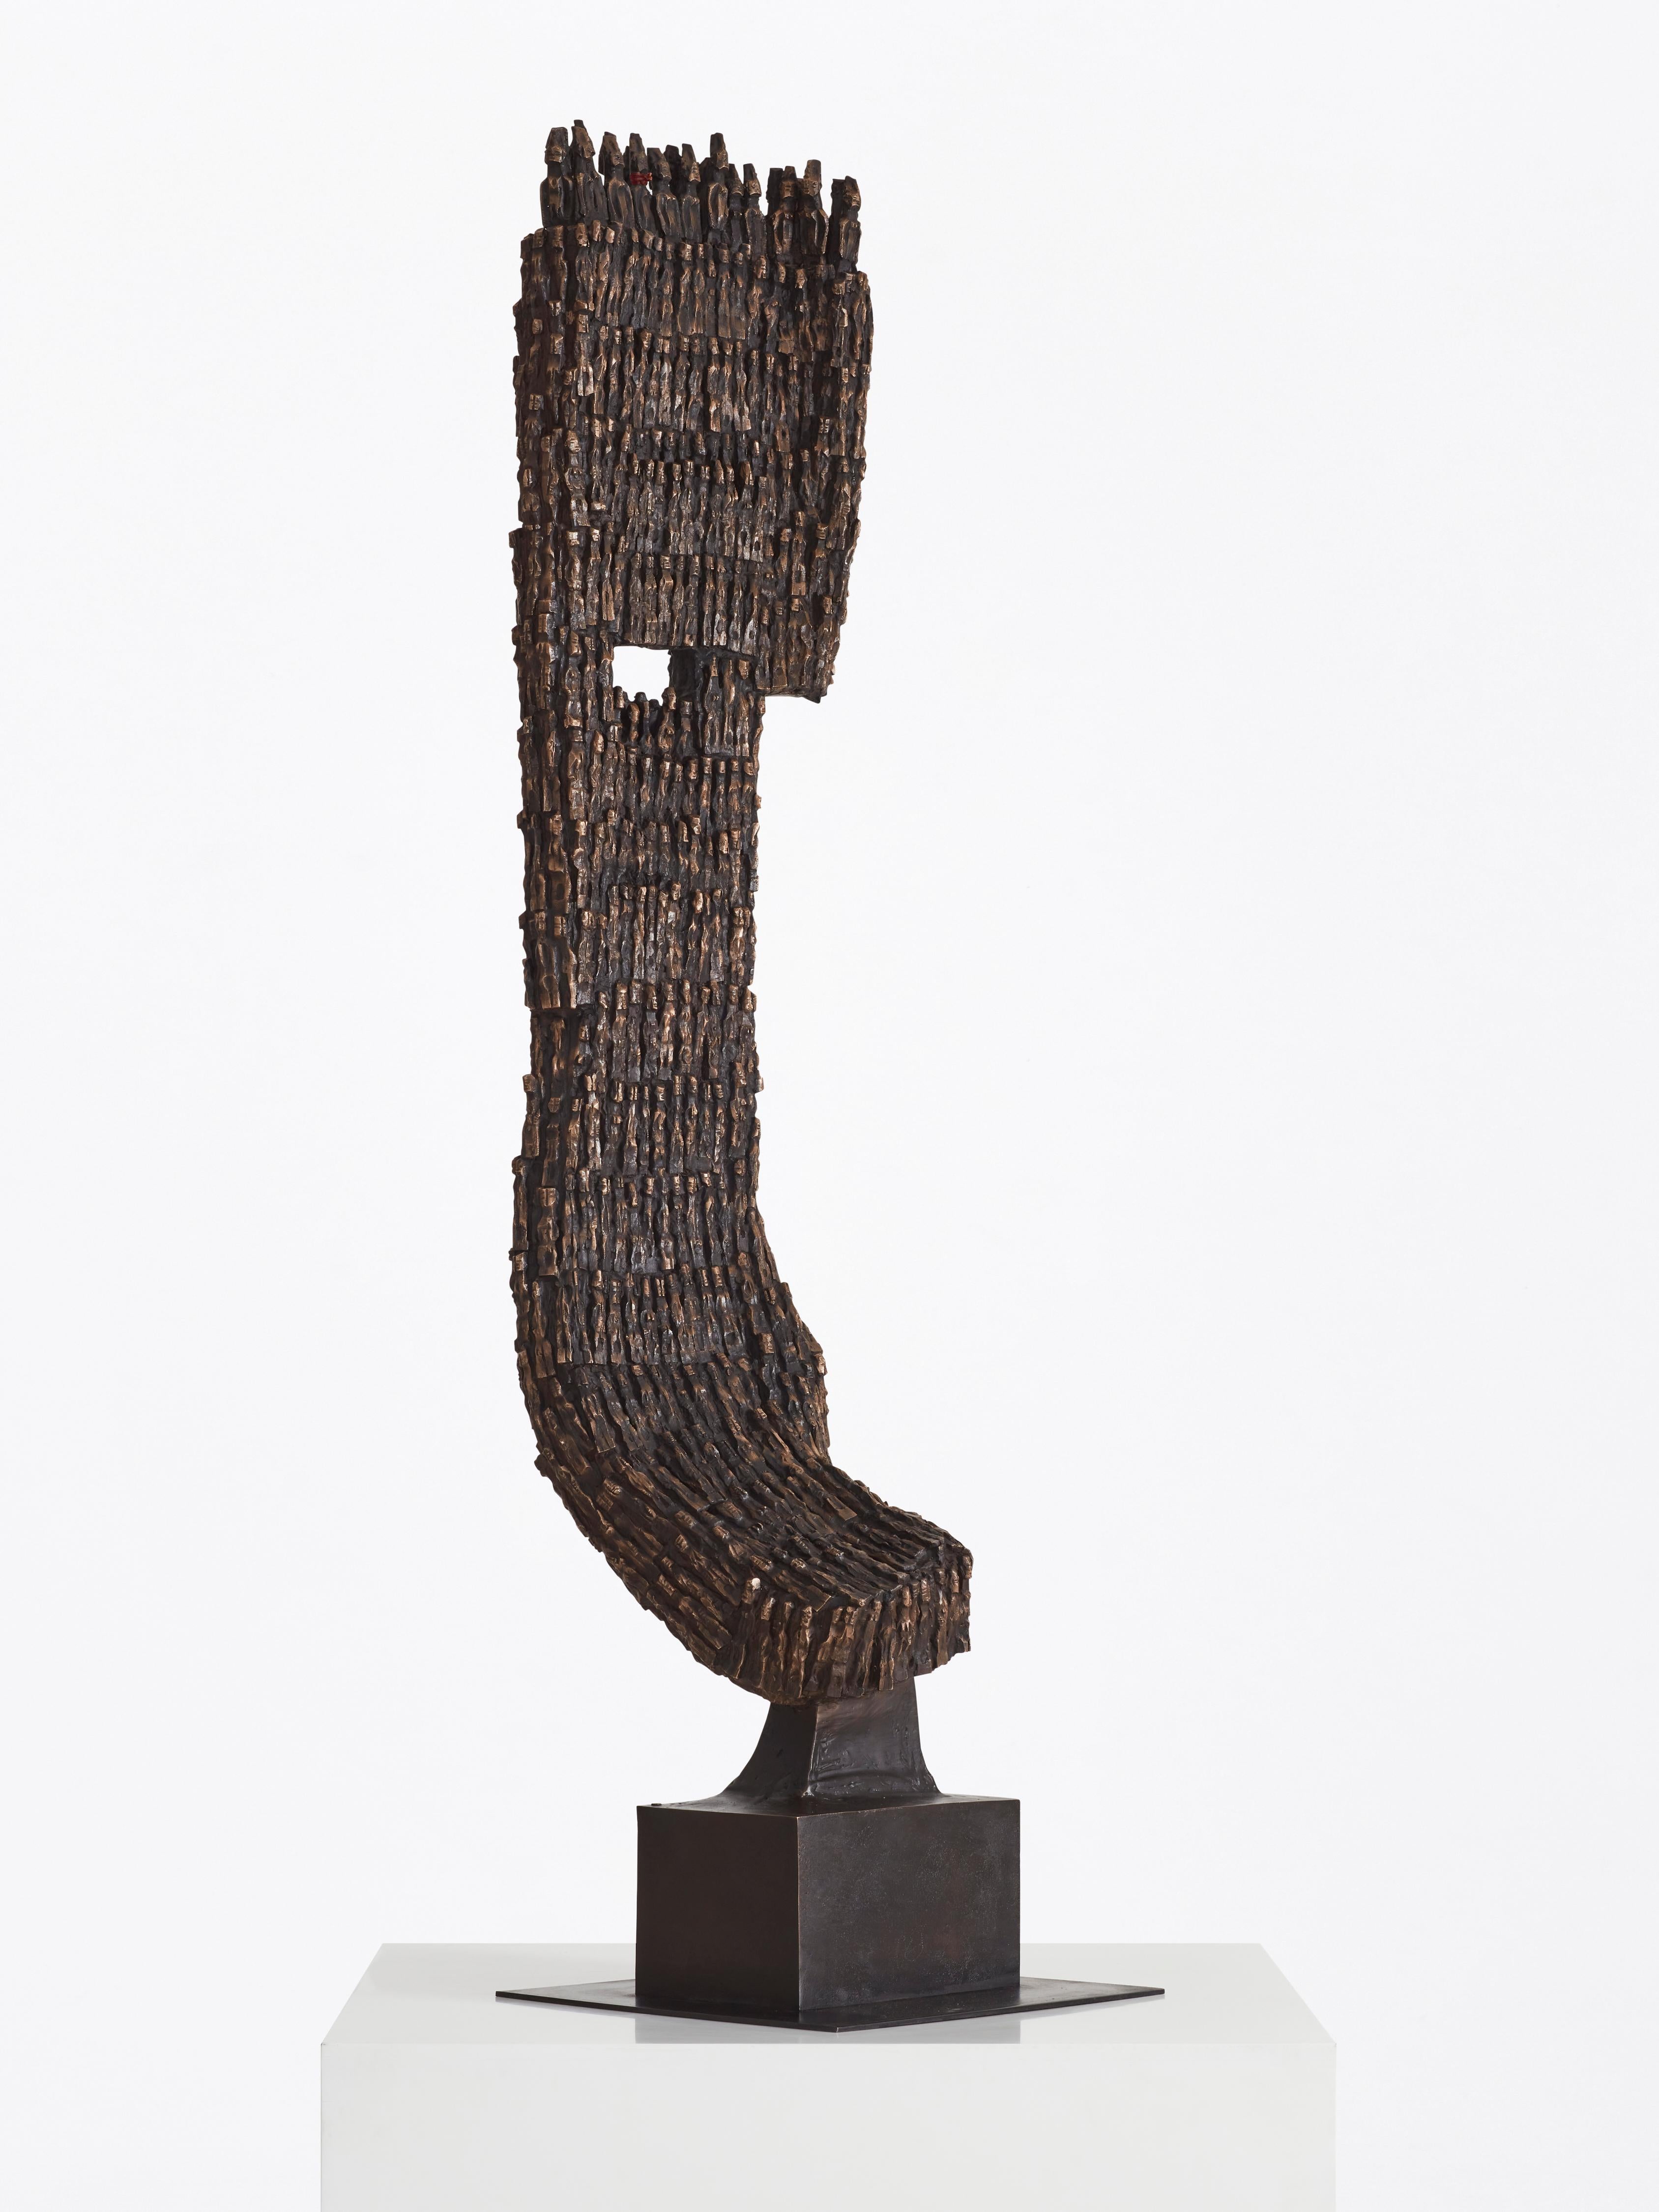 Steeped in the cultural practices of his native Benin, Dominique Zinkpè’s work is imbued with a guiding reverence for tradition and a keen sensitivity to contemporary concerns. The towering bronze form was made using the ancient lost wax casting